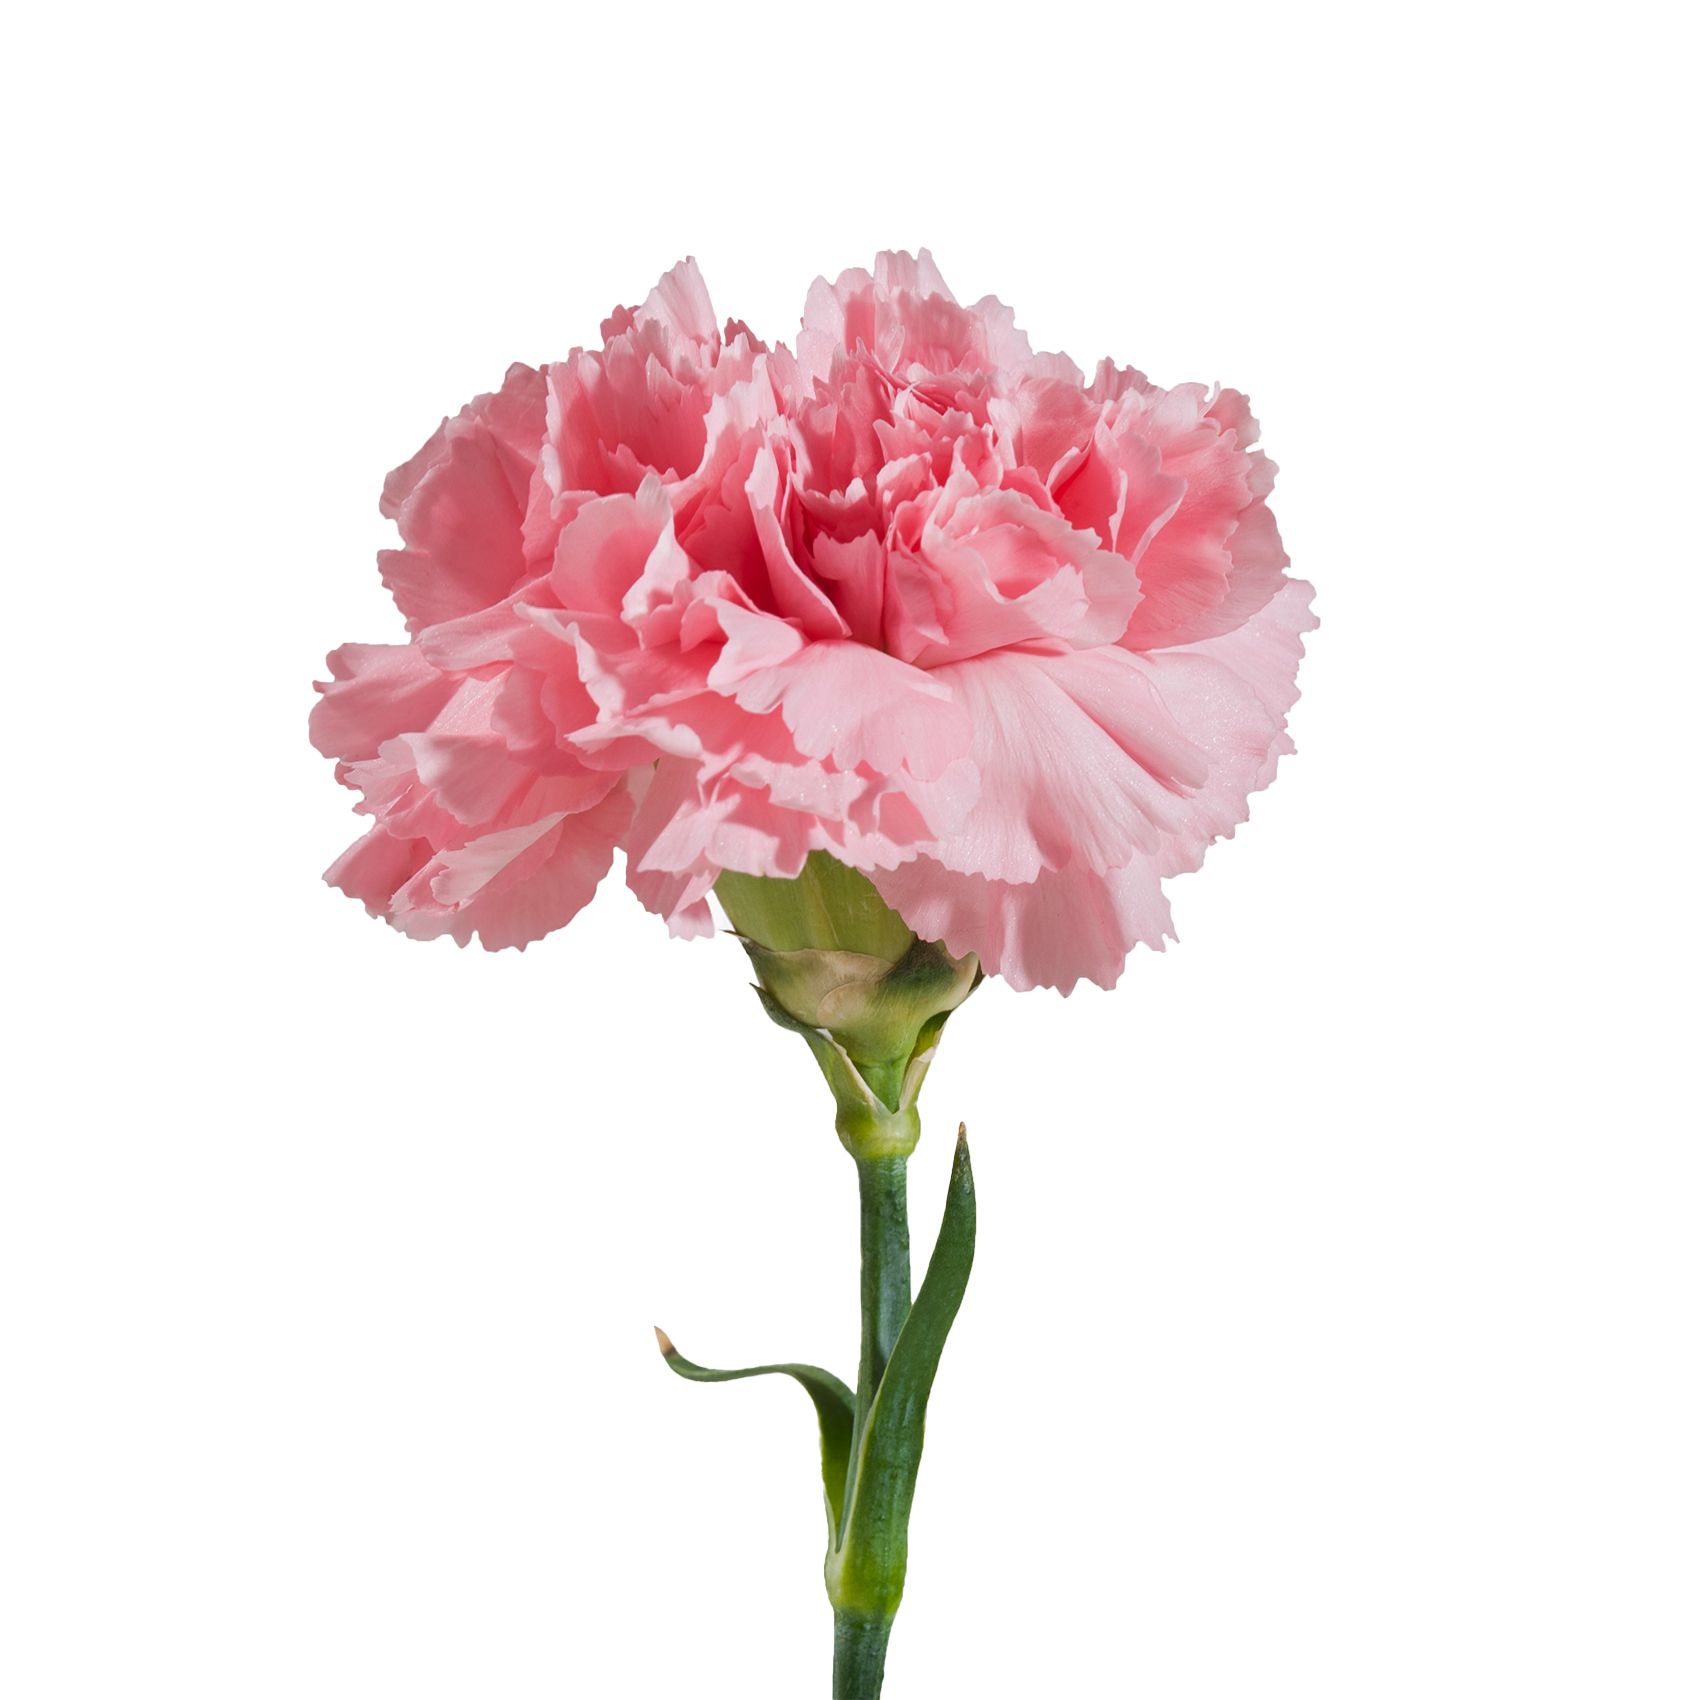 Carnations, 200 ct. - Pink